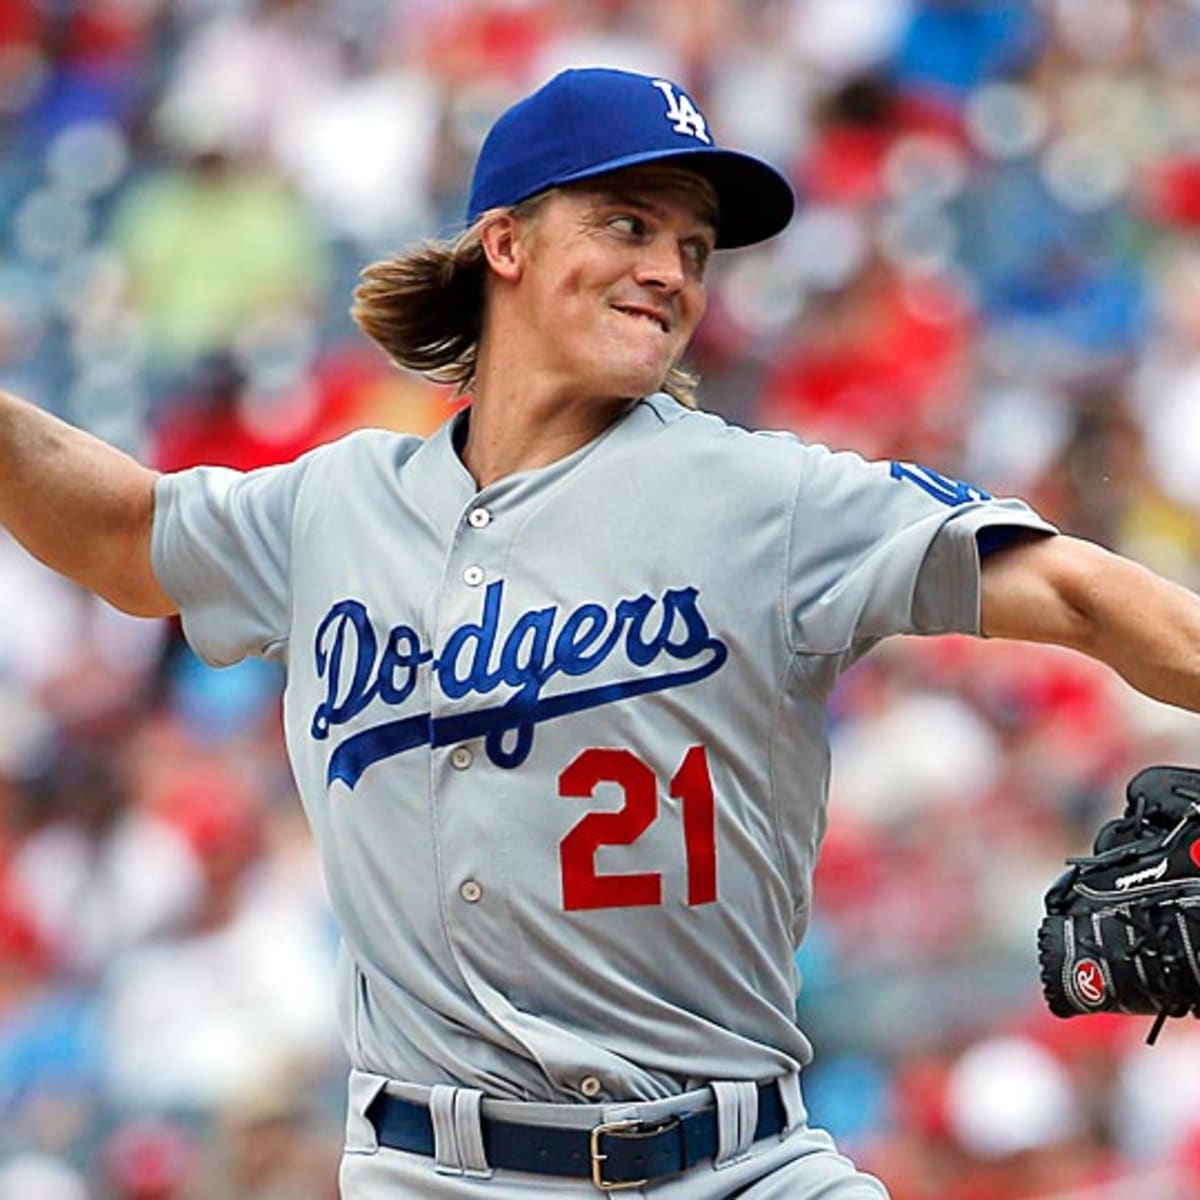 Kemp and Greinke Help Dodgers Even Series With Cardinals - The New